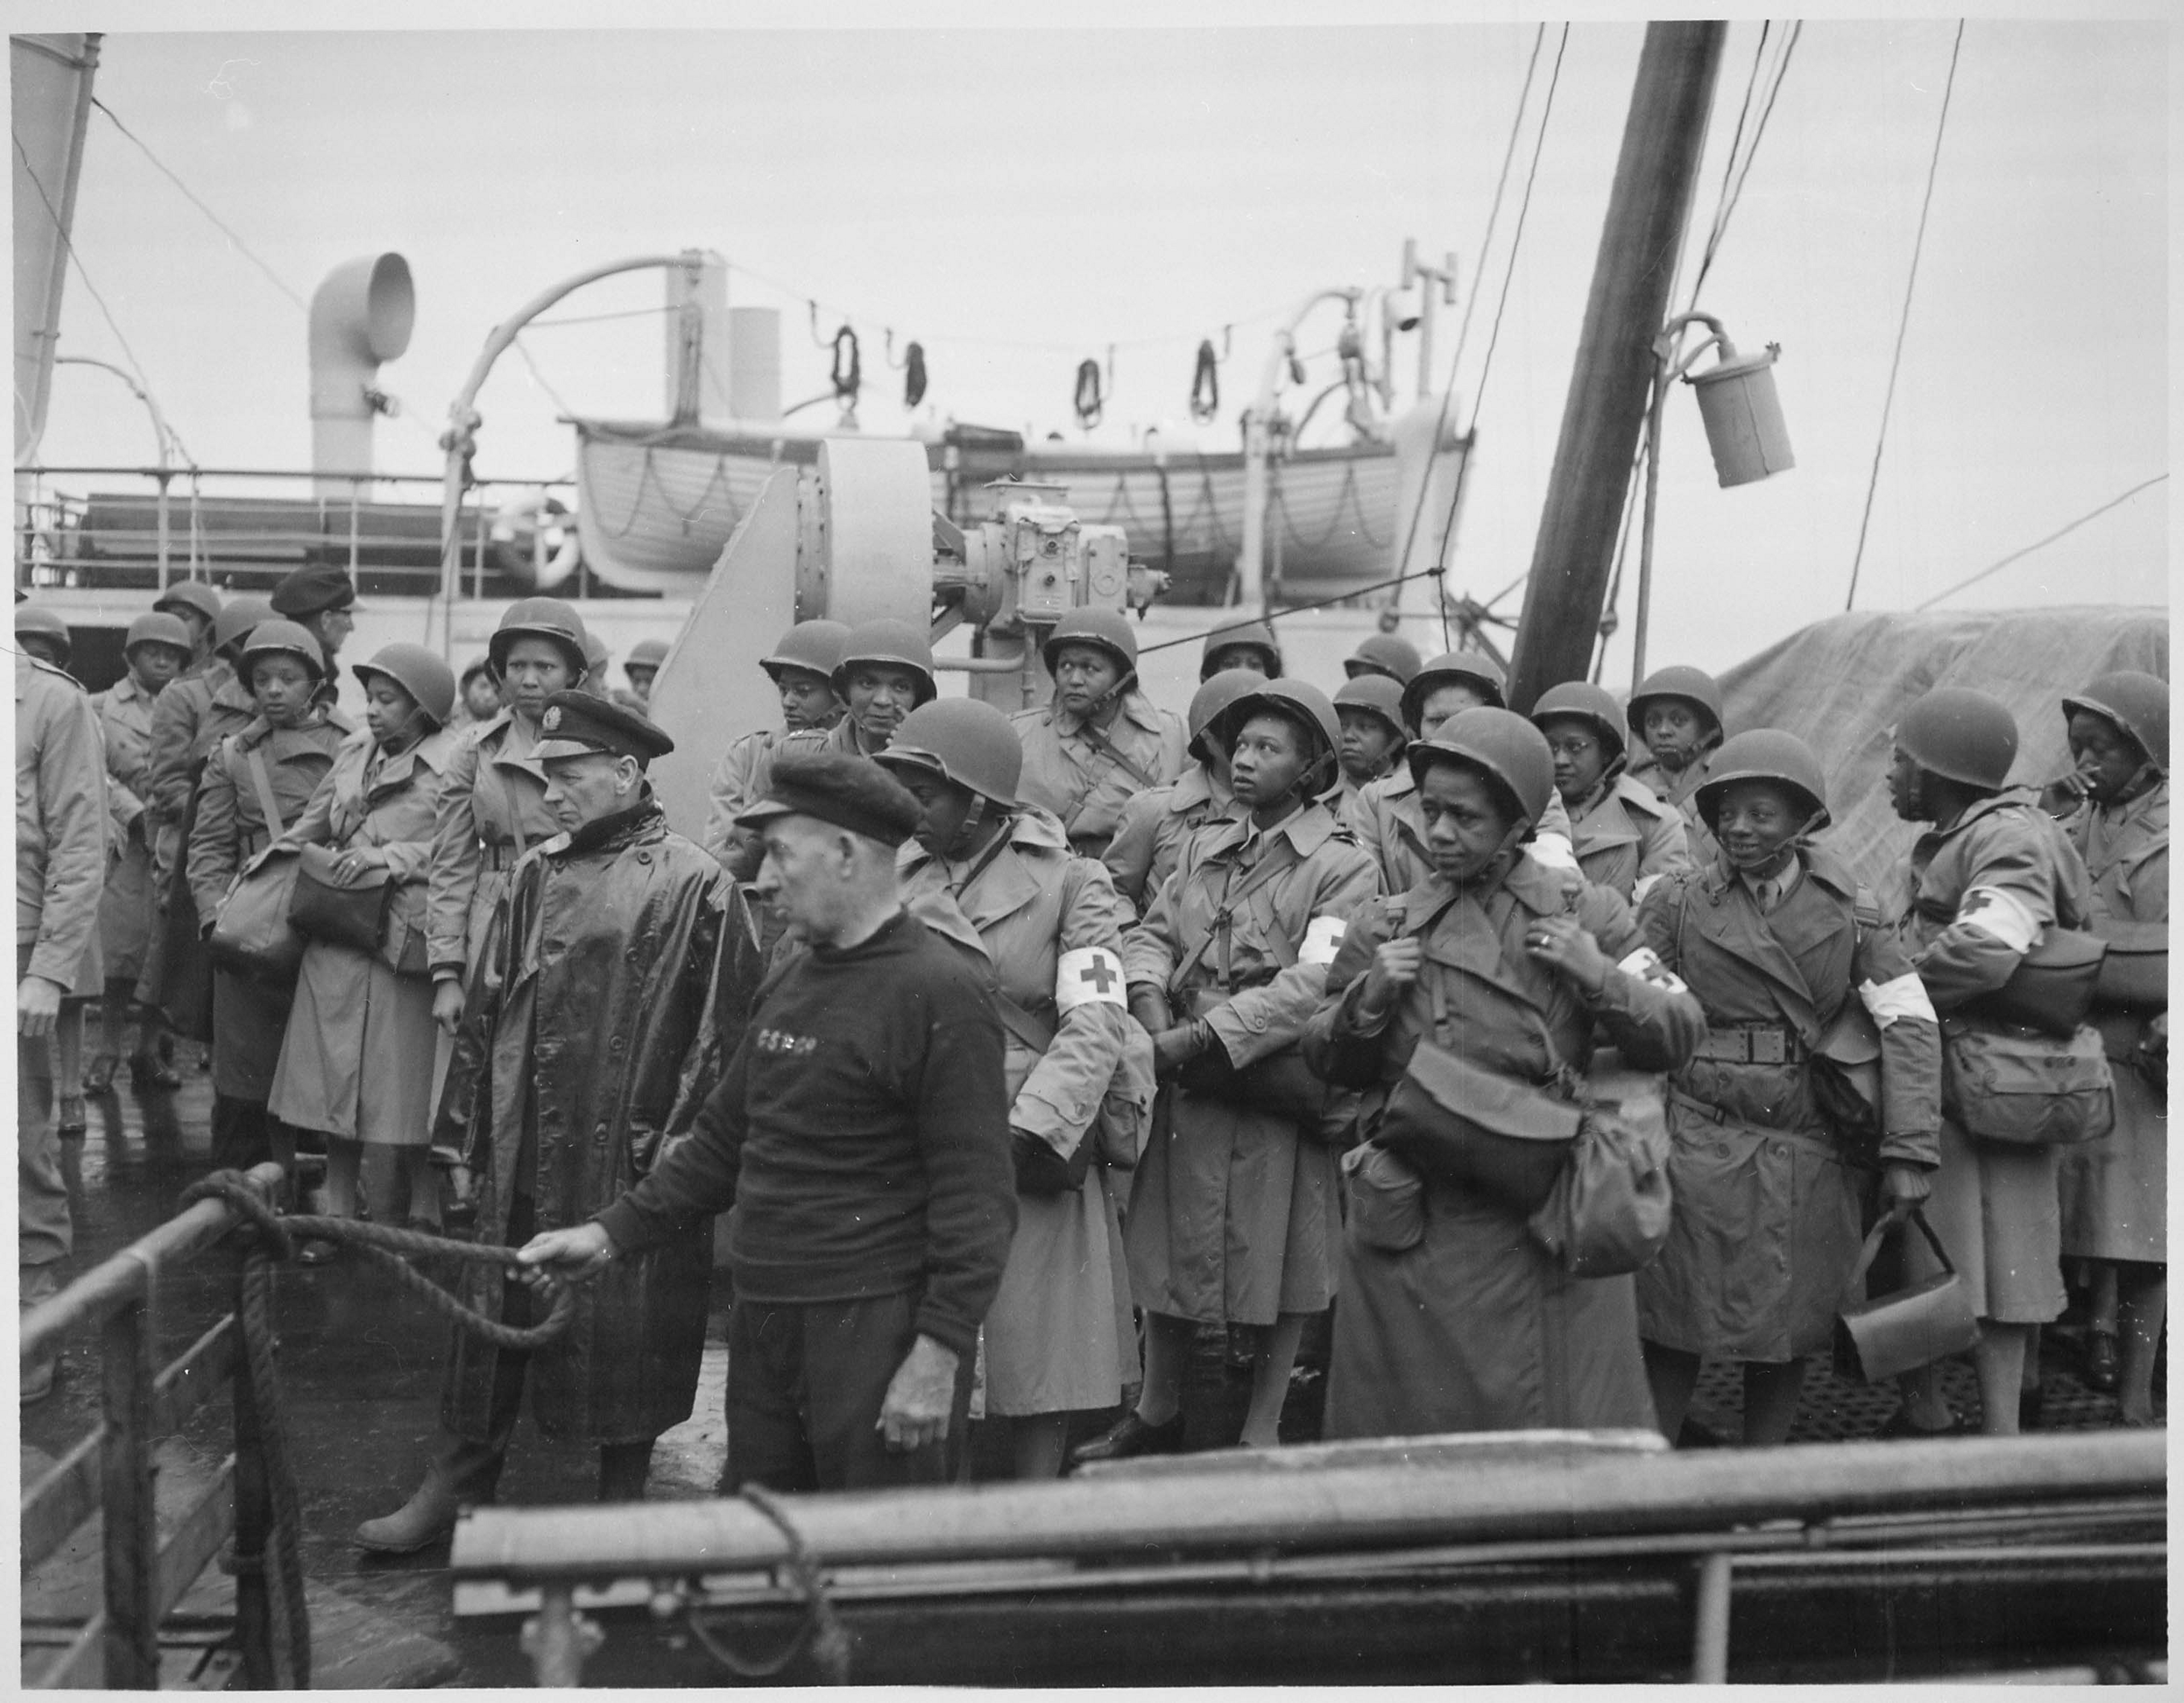 US Army nurses, newly arrived, line the rail of their vessel as it pulls into port of Greenock, Scotland, in European Theatre of Operations during World War 2, 1944. Image courtesy National Archives. (Photo by Smith Collection/Gado/Getty Images).